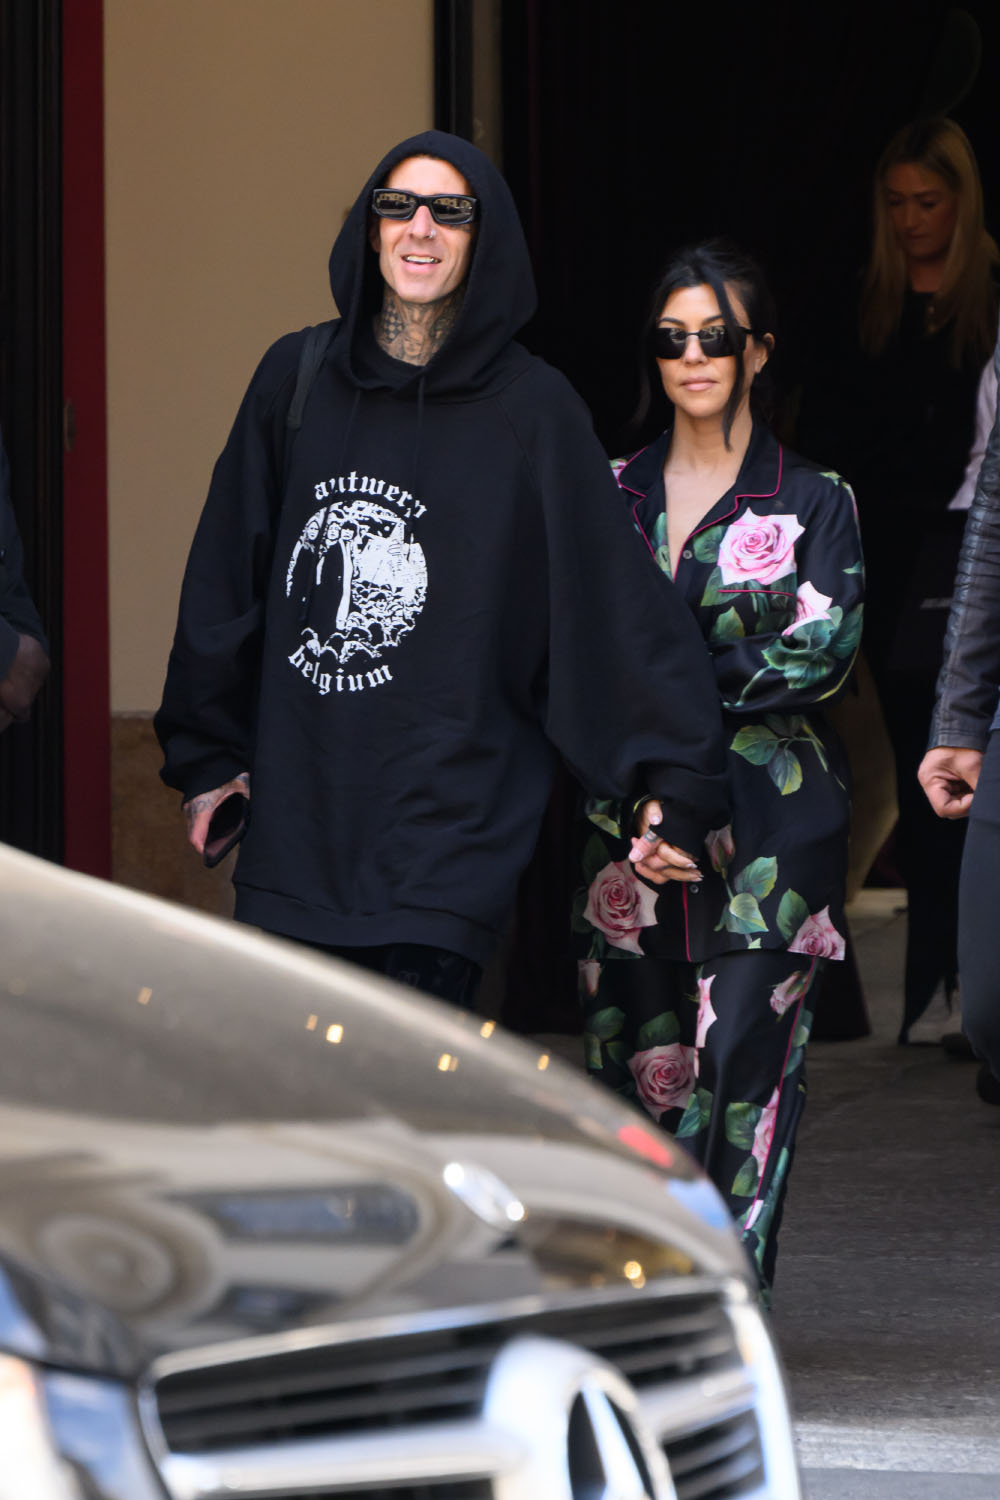 Kourtney Kardashian and Travis Barker
Kourtney Kardashian and Travis Barker out and about, Milan, Italy - 30 Apr 2022
Kourtney Kardashian and Travis Barker shopping in Milan and leaving the city with a private flyMilan plane